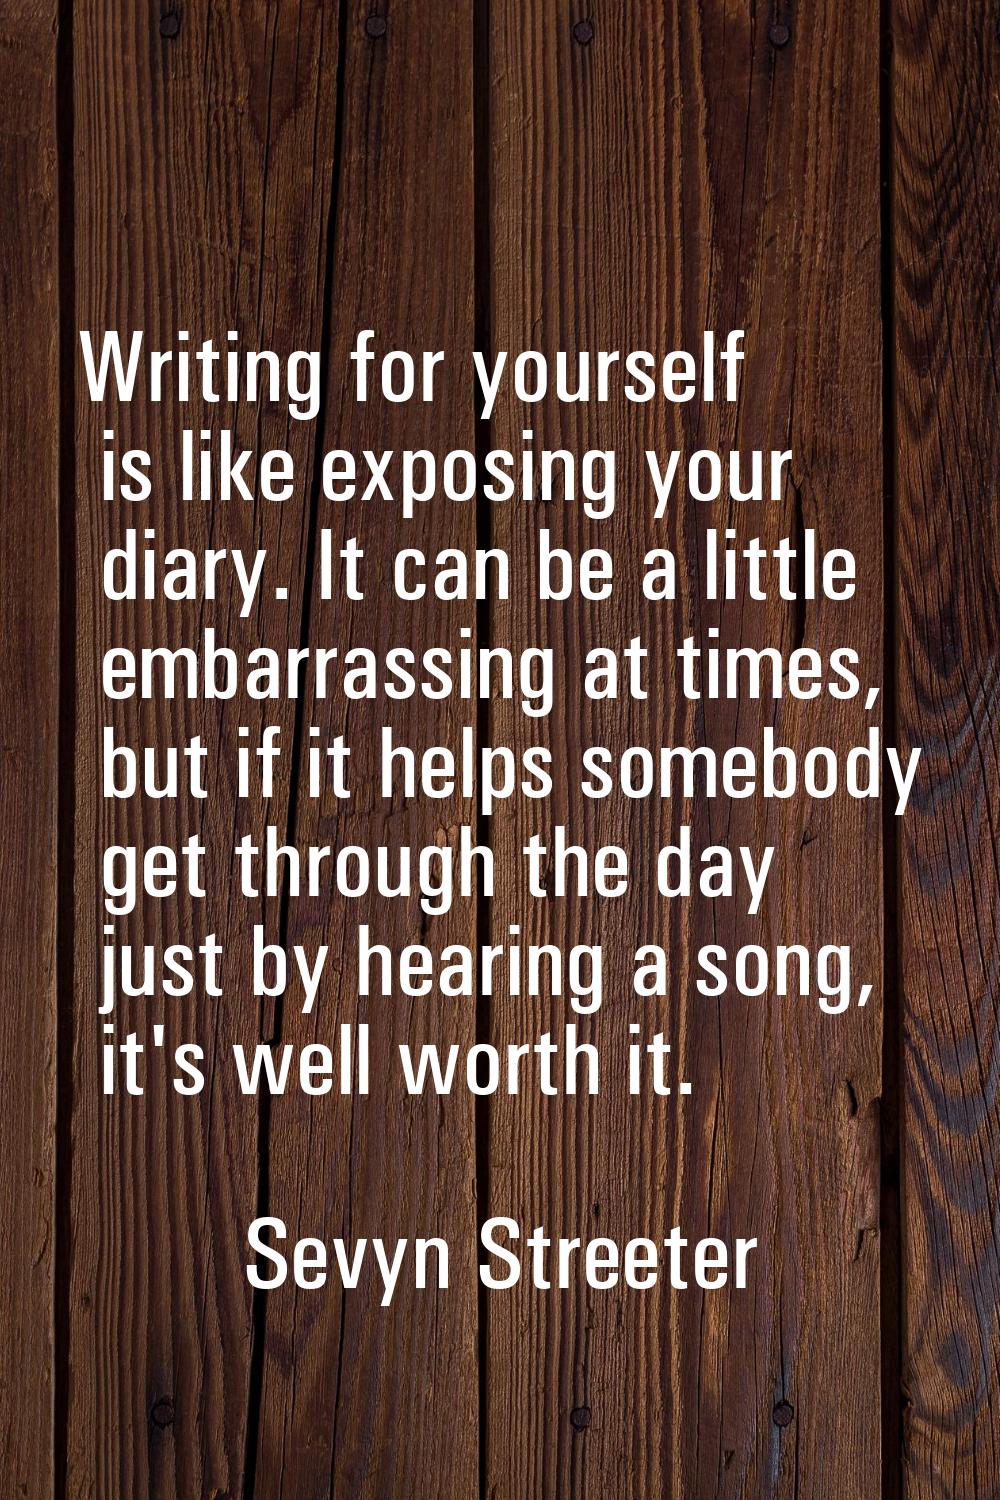 Writing for yourself is like exposing your diary. It can be a little embarrassing at times, but if 